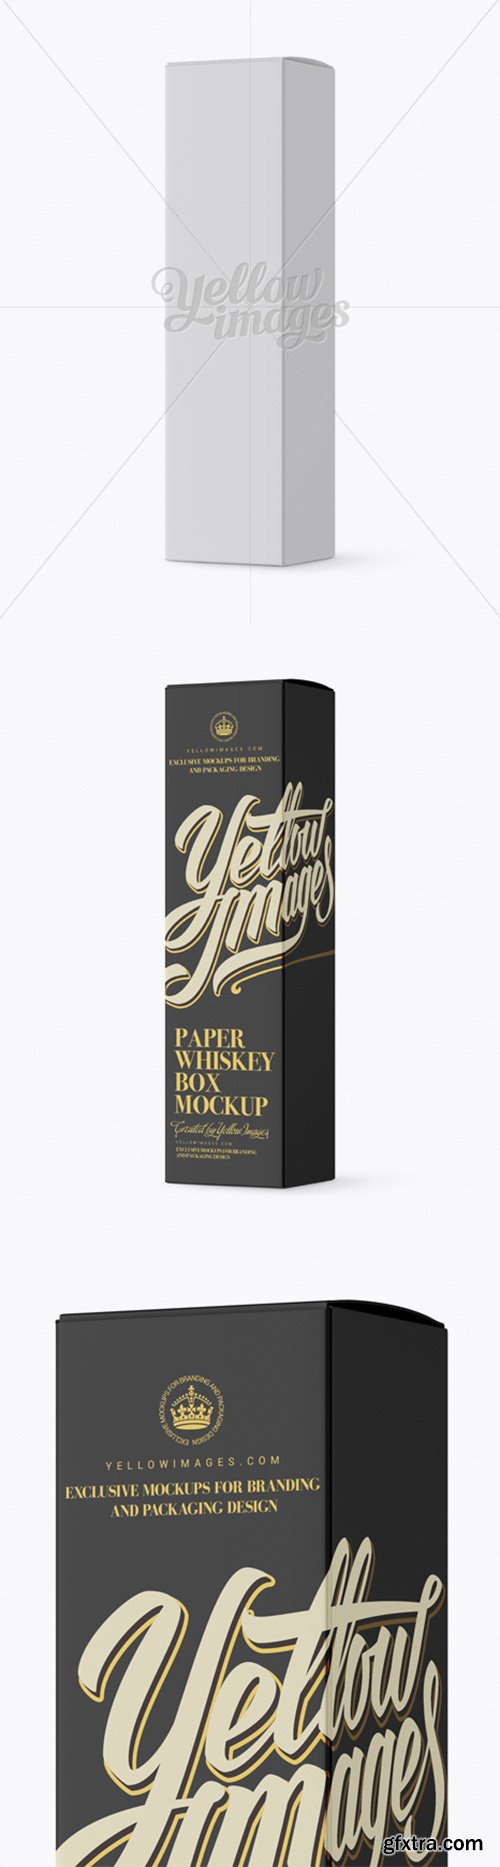 Download Paper Whisky Box Mockup Halfside View 16150 Gfxtra Yellowimages Mockups